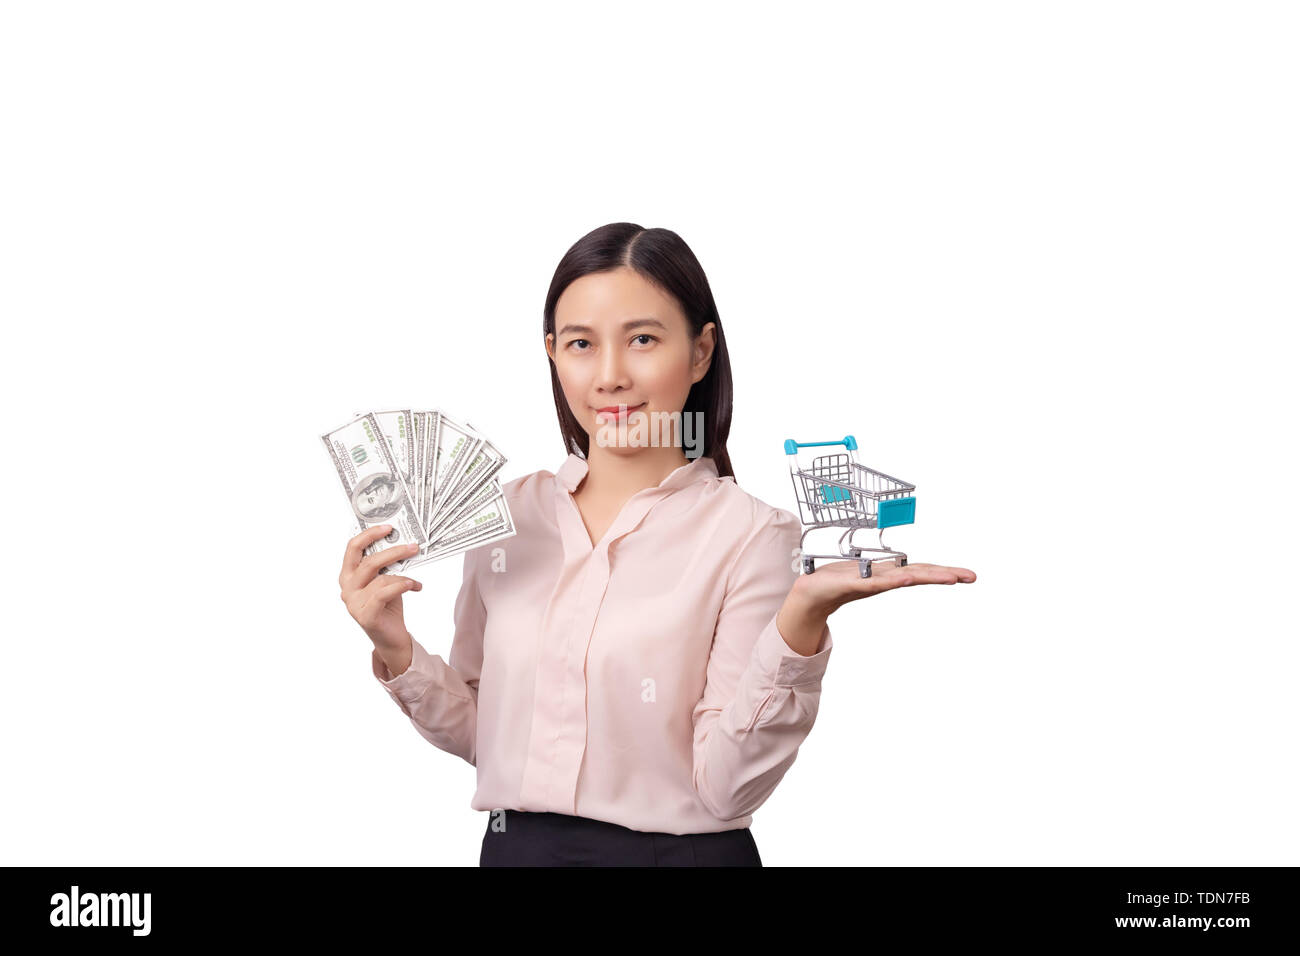 retail commercial business concept, Asian beautiful woman holding banknote money in hand and shopping cart in another hand isolated on white backgroun Stock Photo